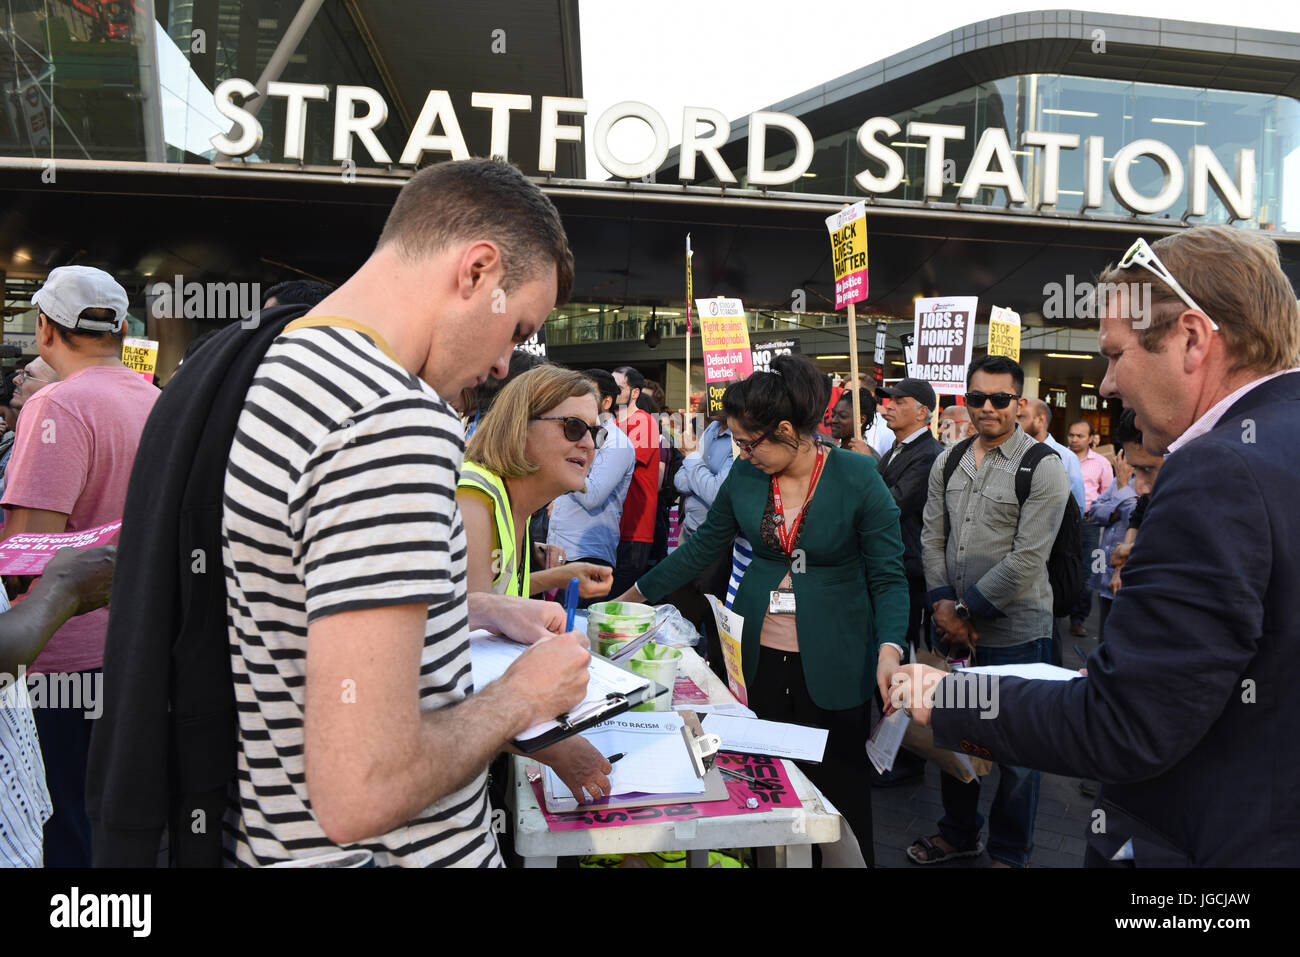 London, UK. 05th JUL 2017. 'STOP ACID ATTACKS' emergency protest outside the Stratford station in East London. Protesters gathered to protest against the recent acid attacks and increasing Islamophobia. The man is signing petition. Credit: ZEN - Zaneta Razaite / Alamy Live News Stock Photo